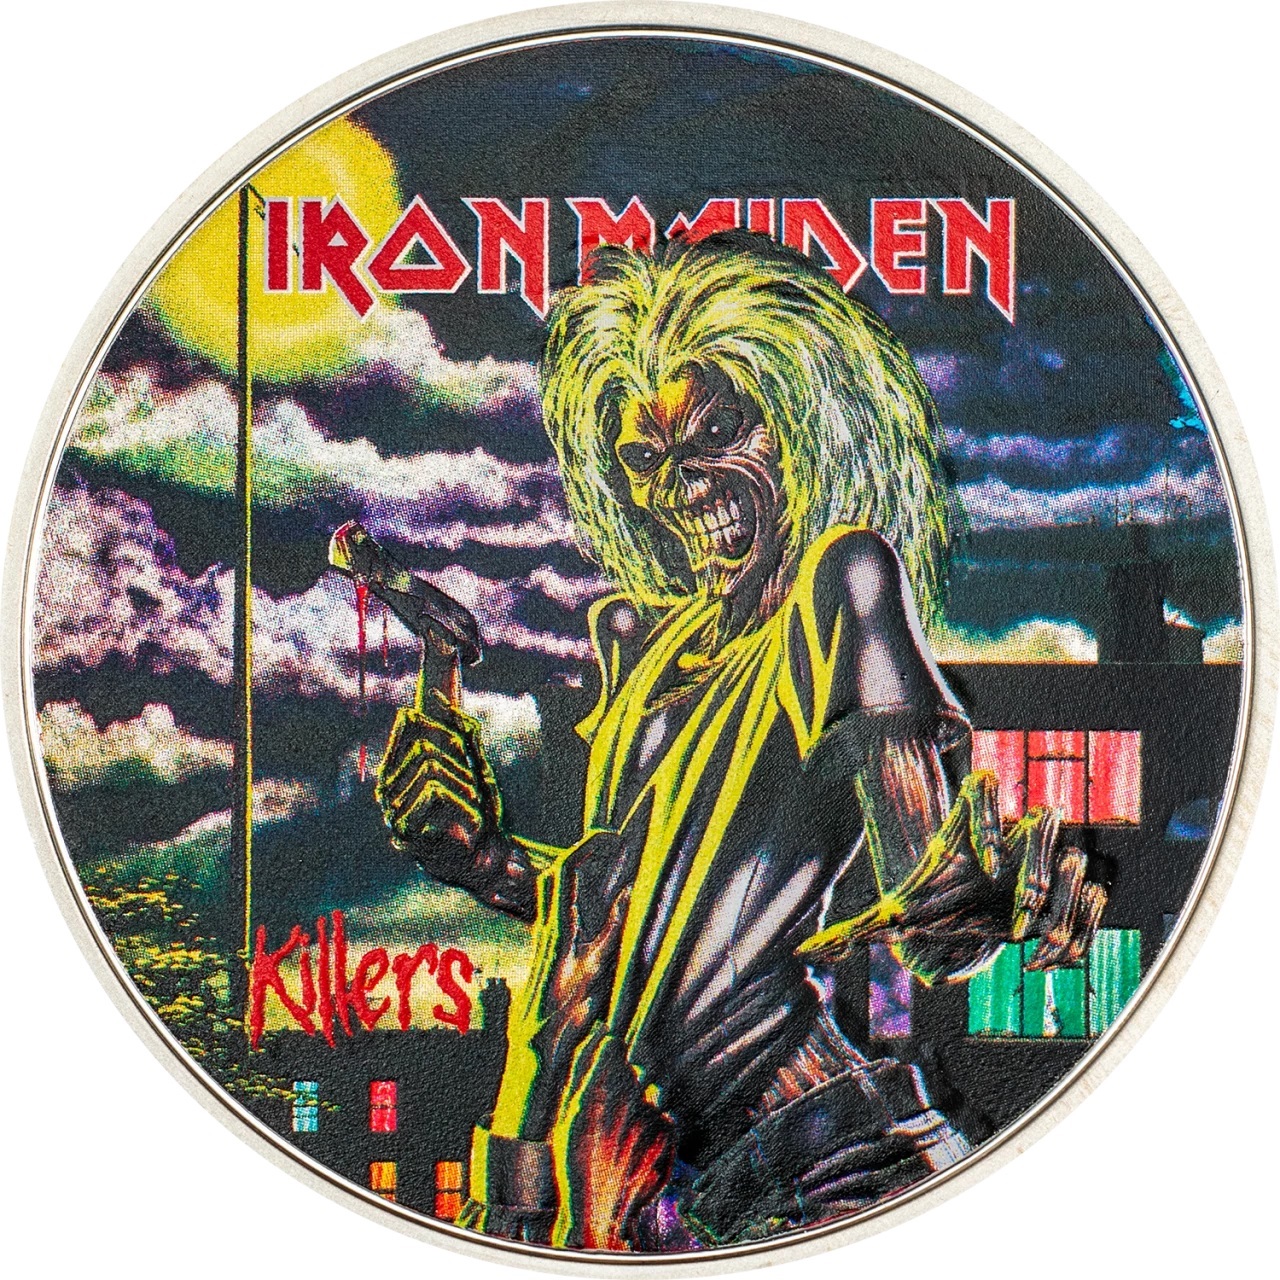 (W099.5.D.2024.30677) Cook Islands 5 Dollars Killers, Iron Maiden 2024 - Proof silver Reverse (zoom)